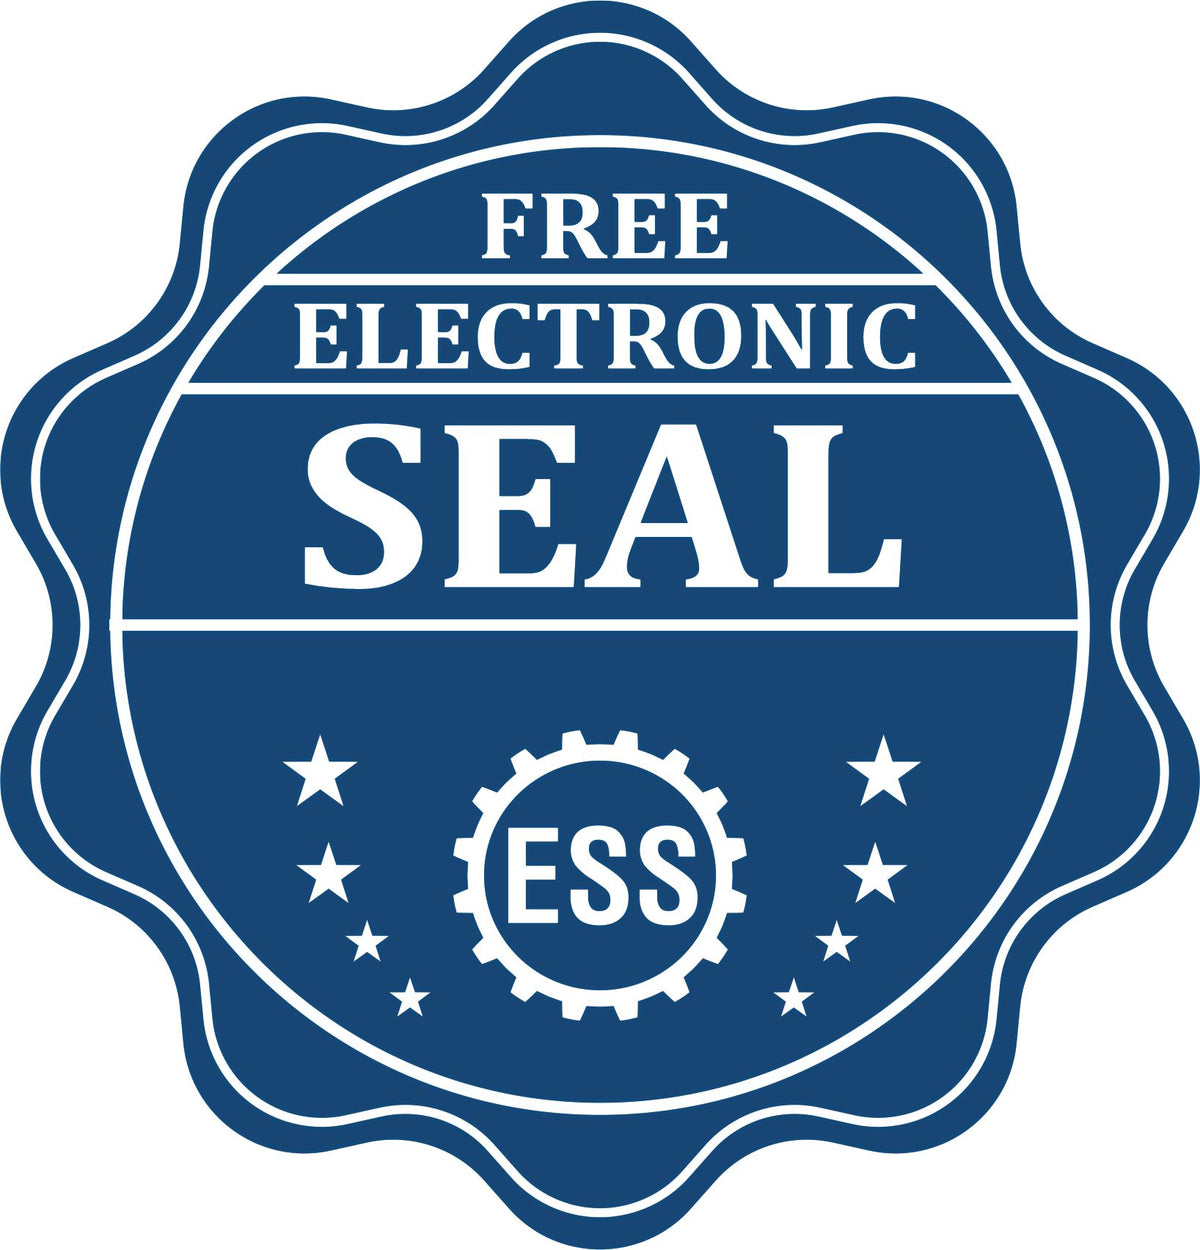 A badge showing a free electronic seal for the Long Reach Missouri Geology Seal with stars and the ESS gear on the emblem.